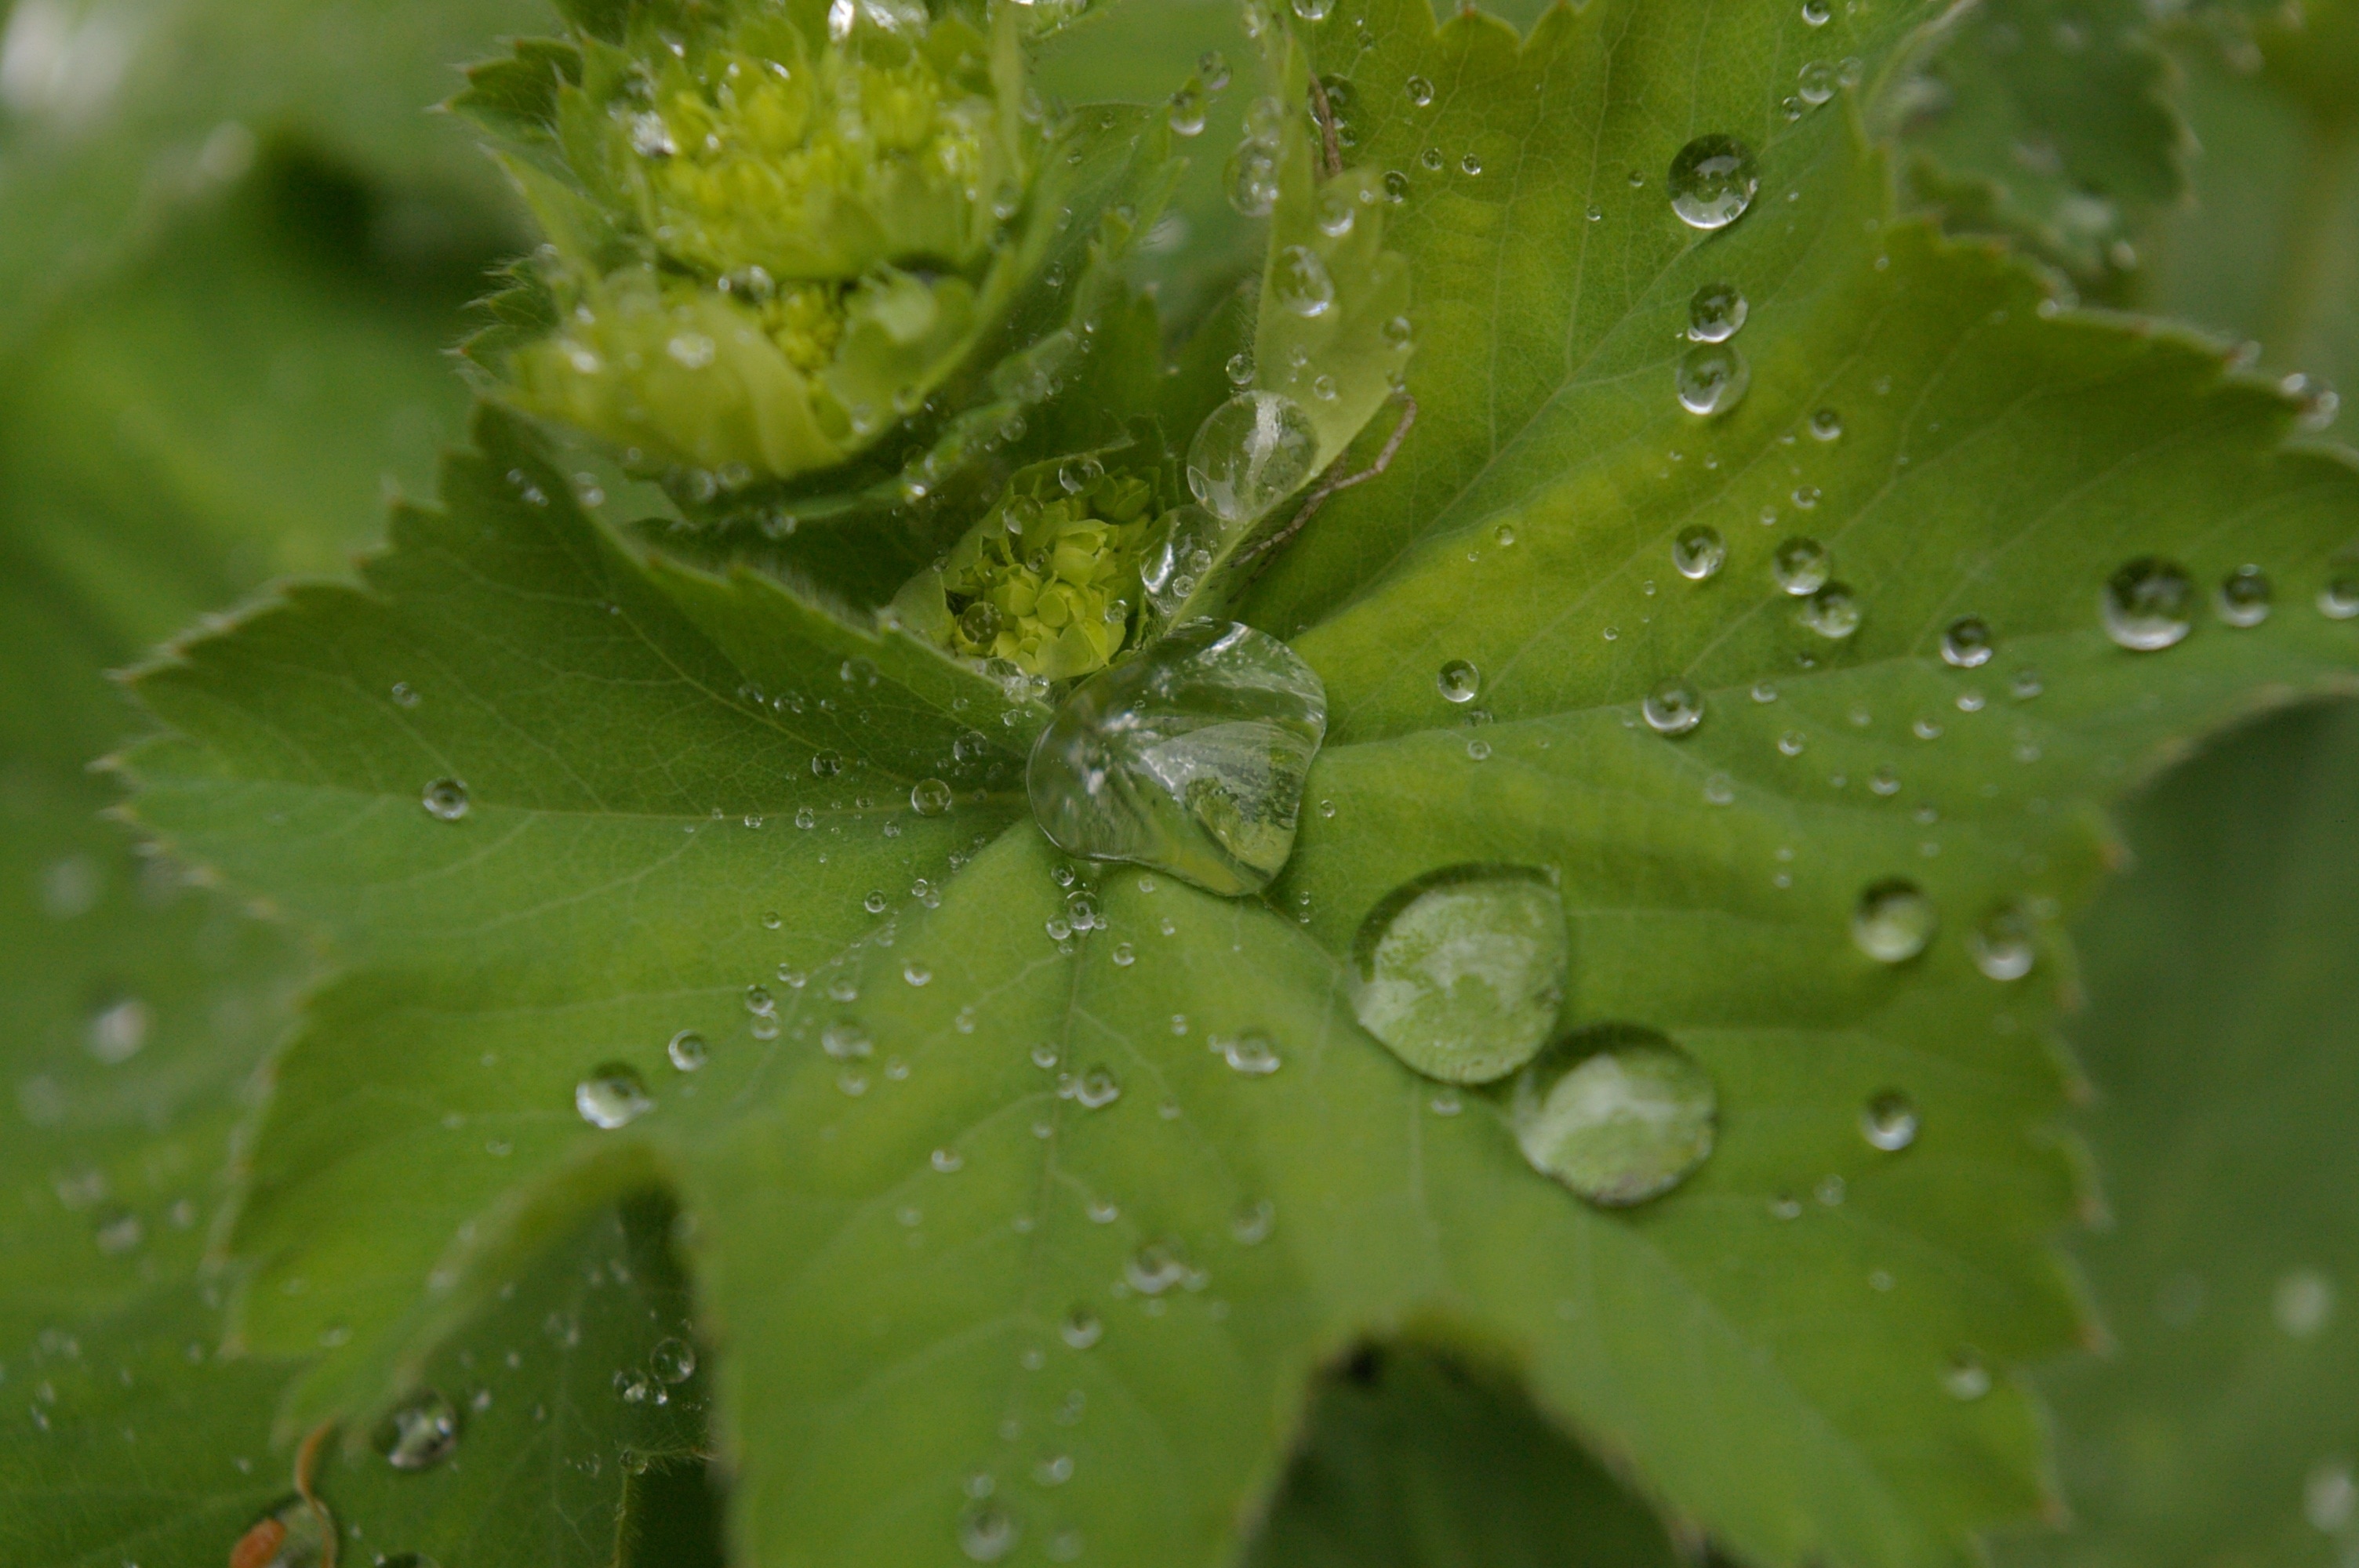 macro shot photography of water dews on green leaf during daytime